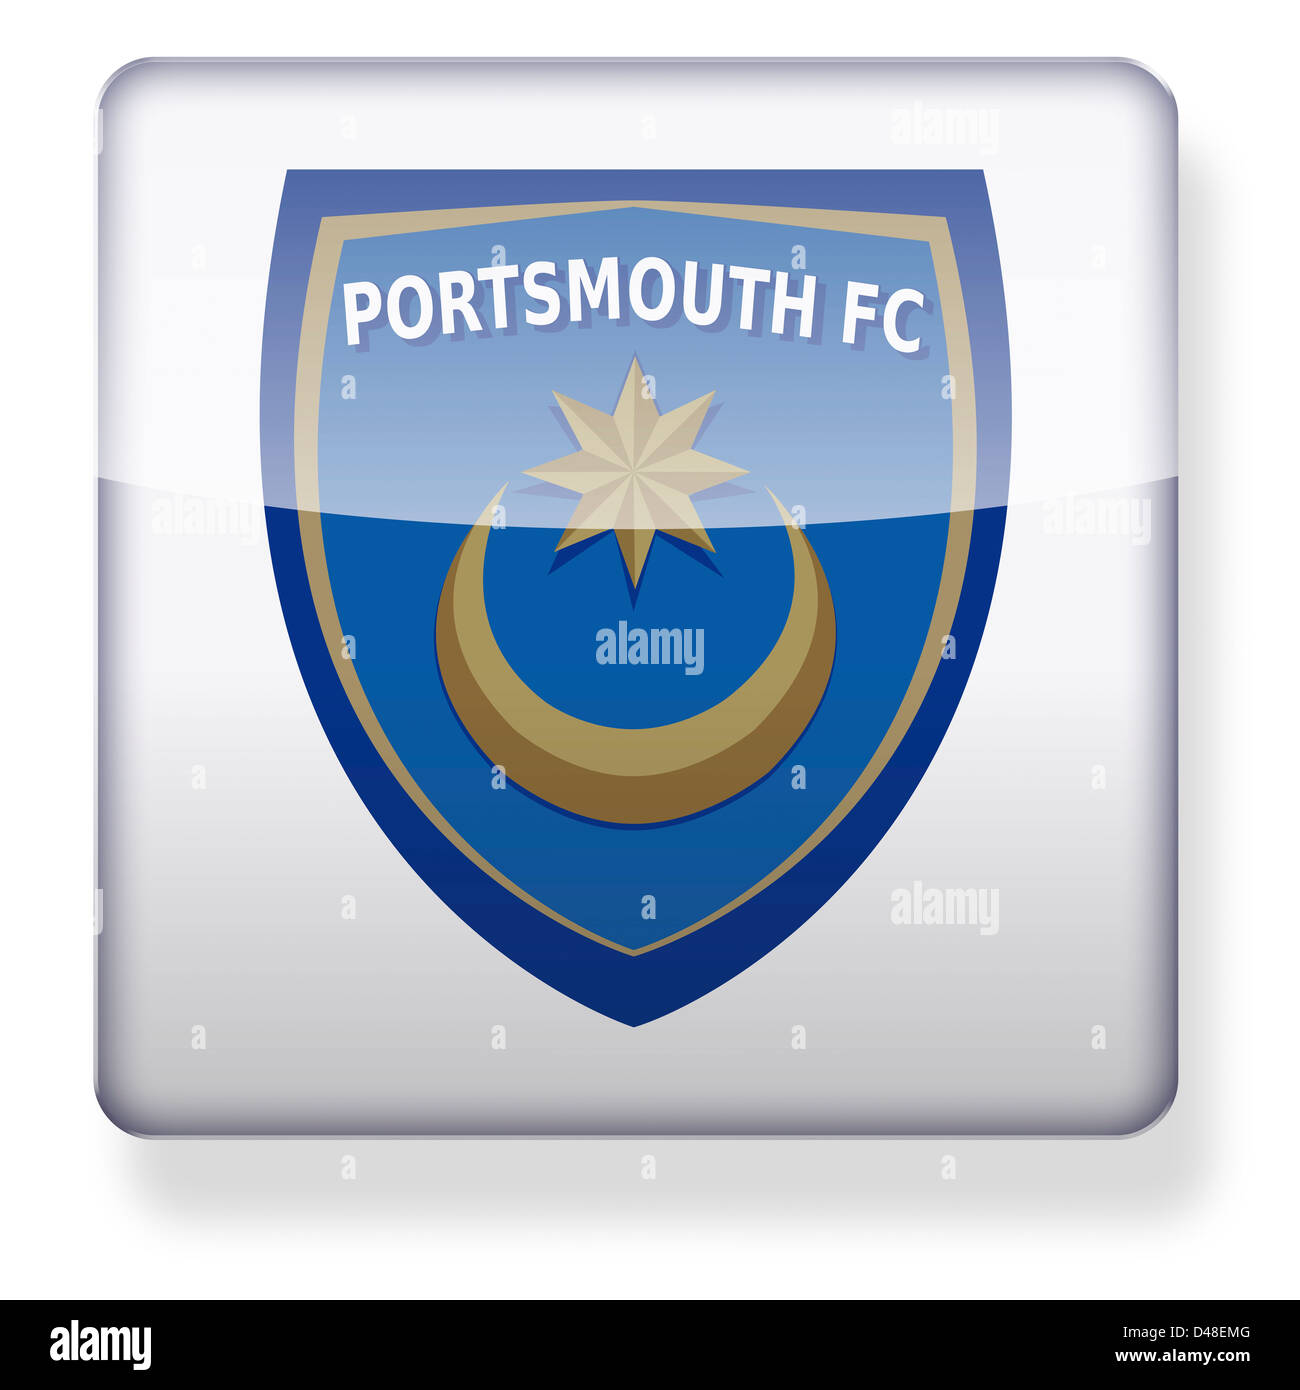 Portsmouth football club logo as an app icon. Clipping path included. Stock Photo